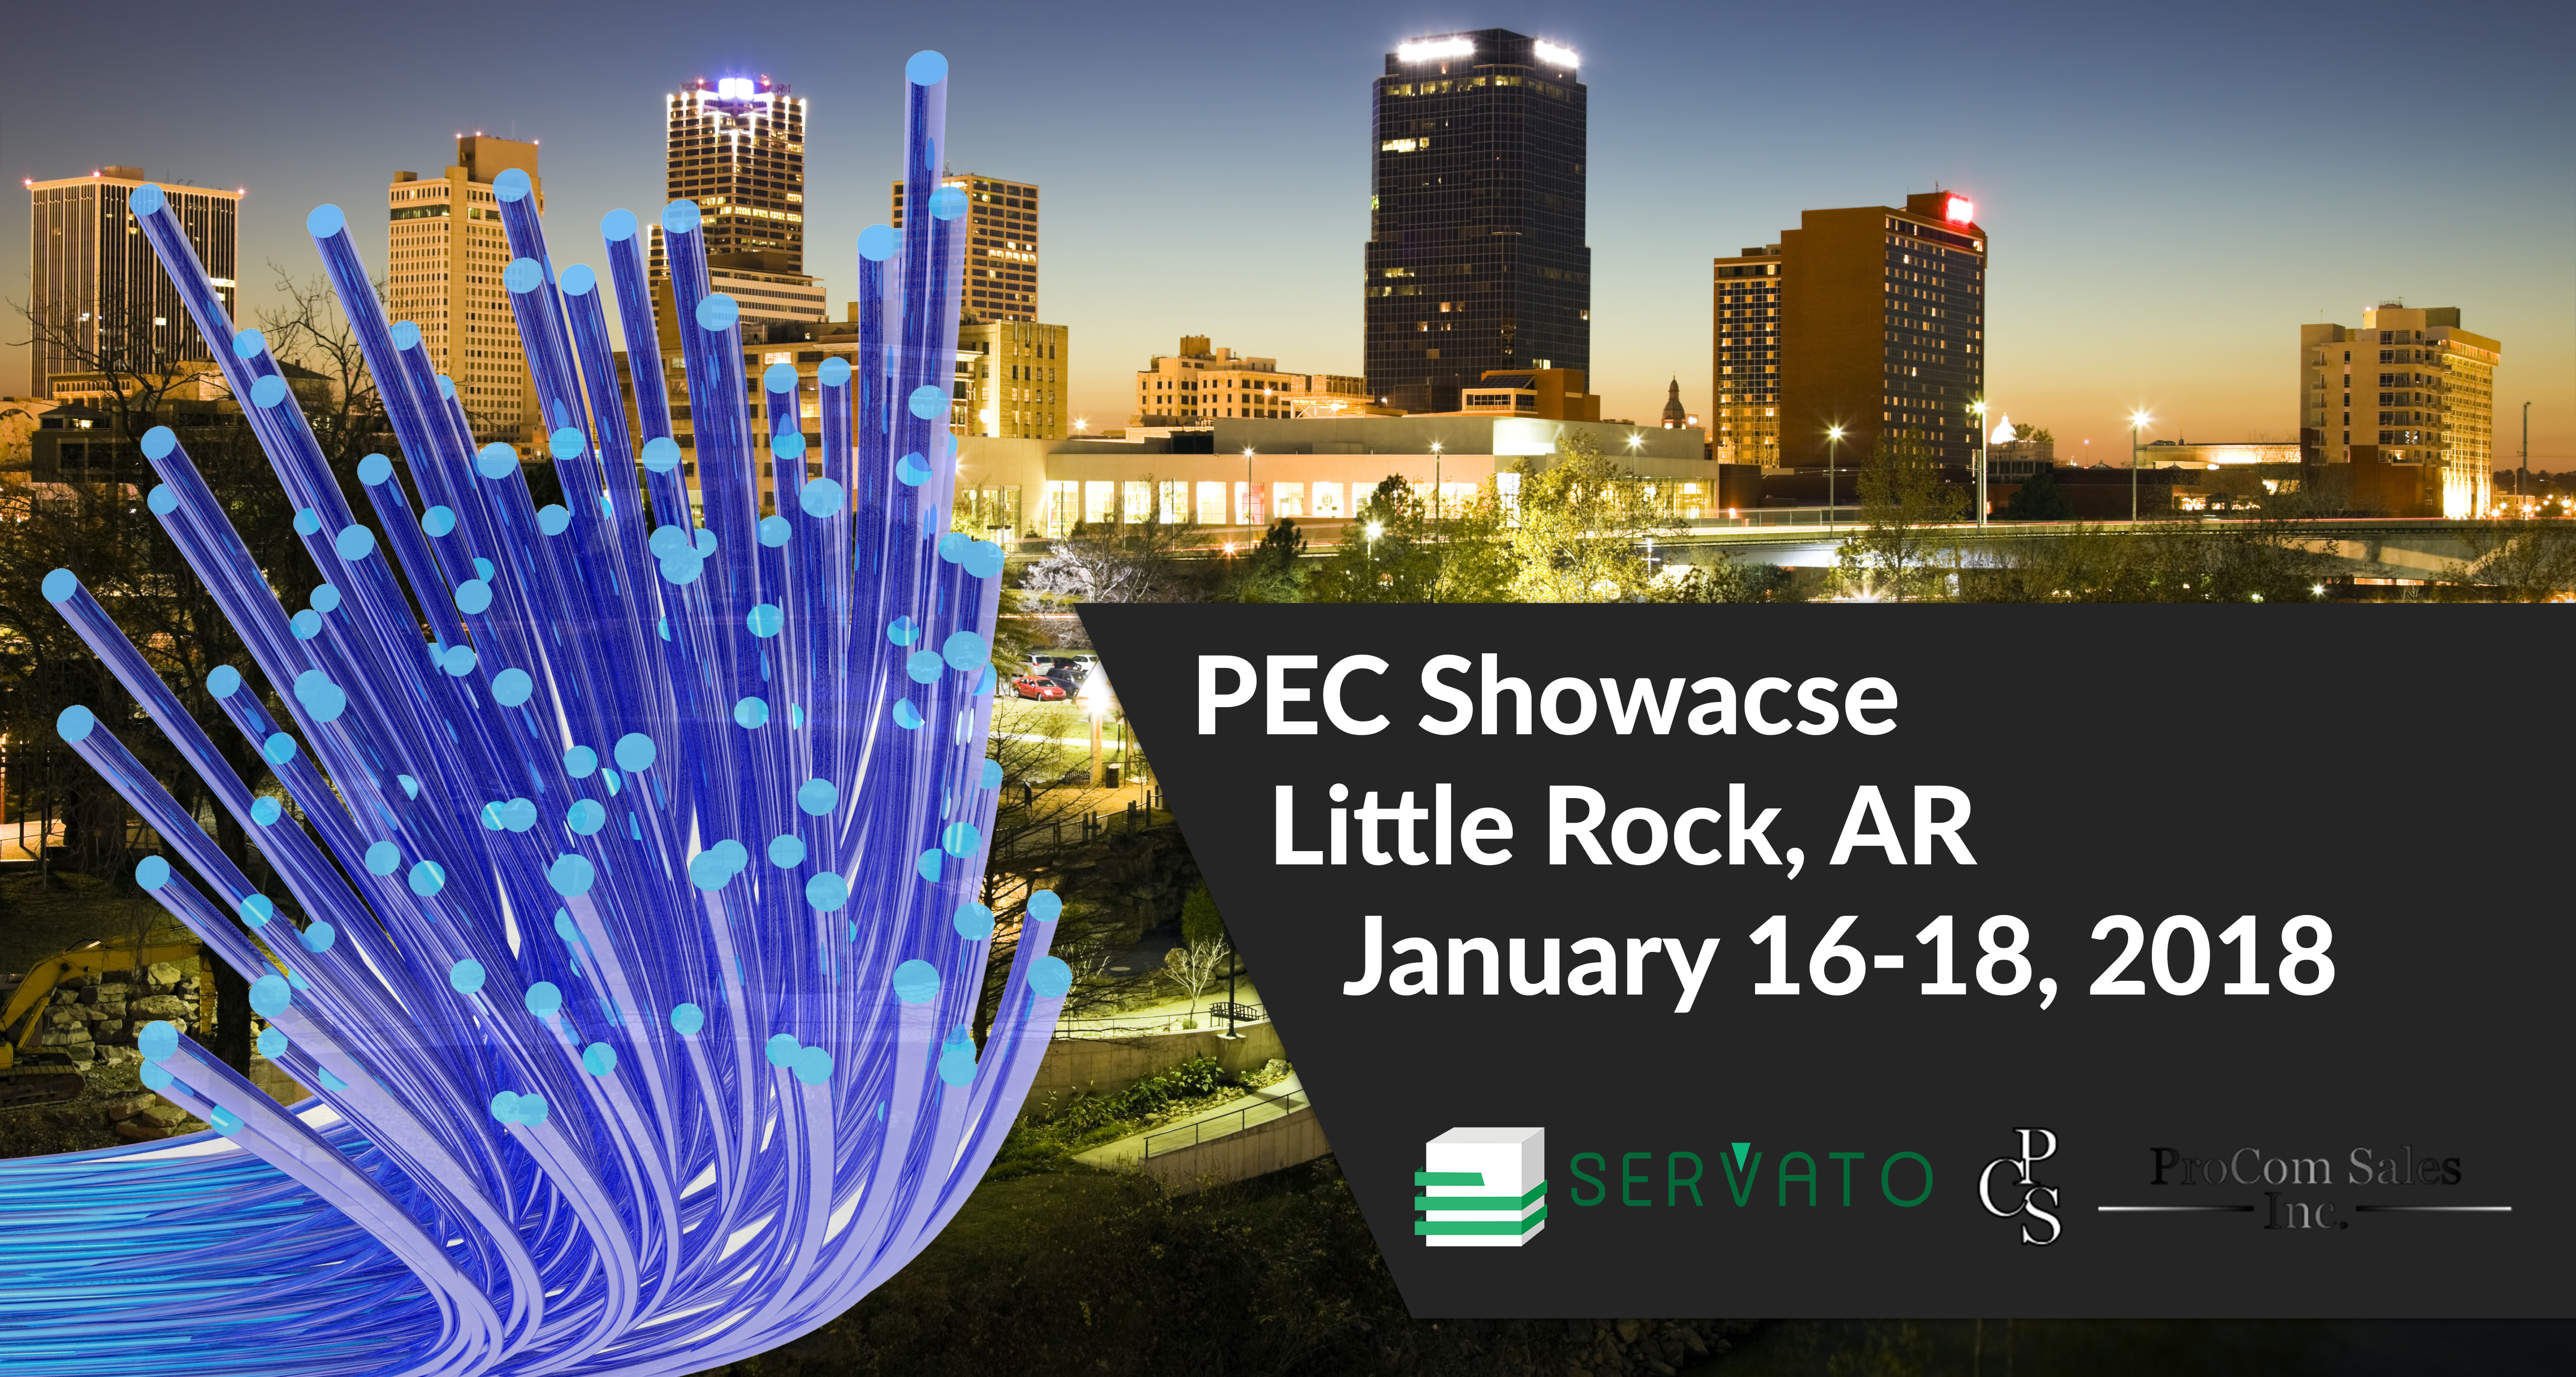 Here at the PEC Showcase in Little Rock!